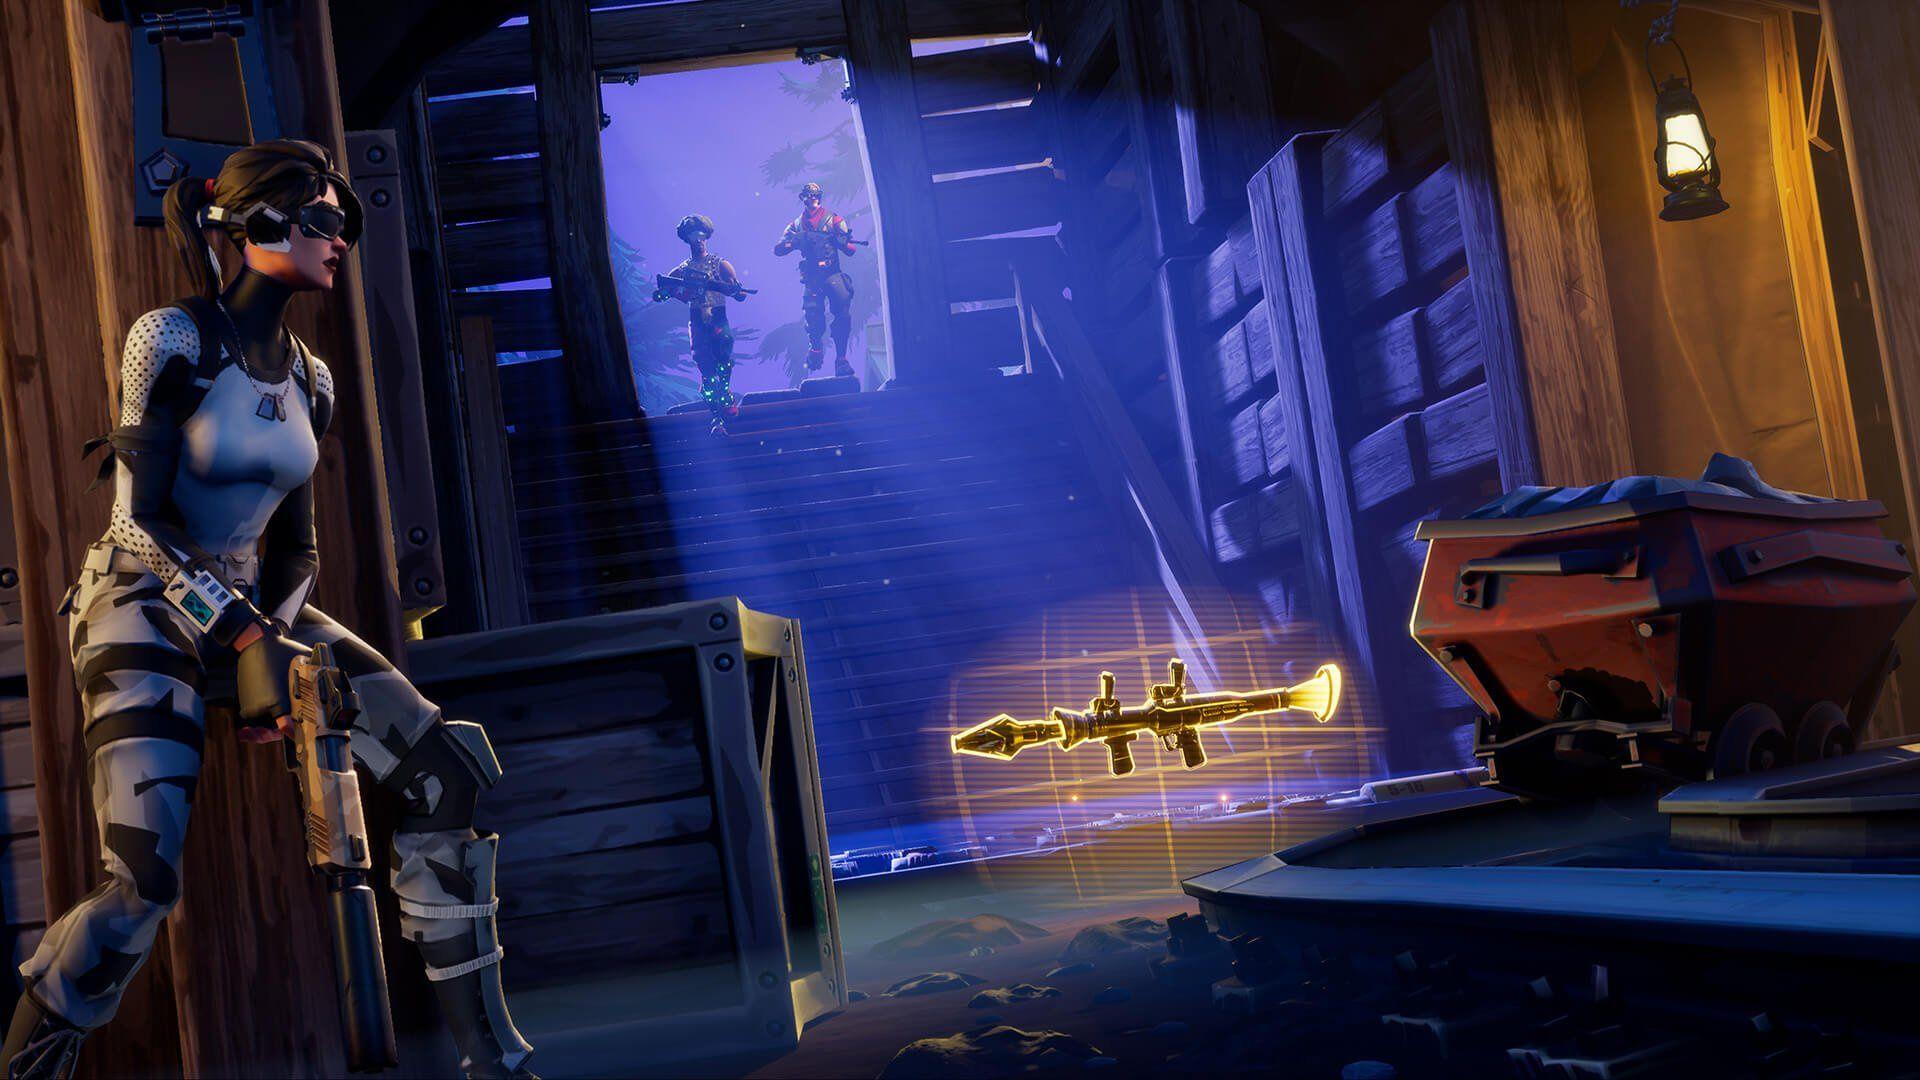 Fortnite V.2.2.0 Patch Brings Changes to Battle Royale and Save